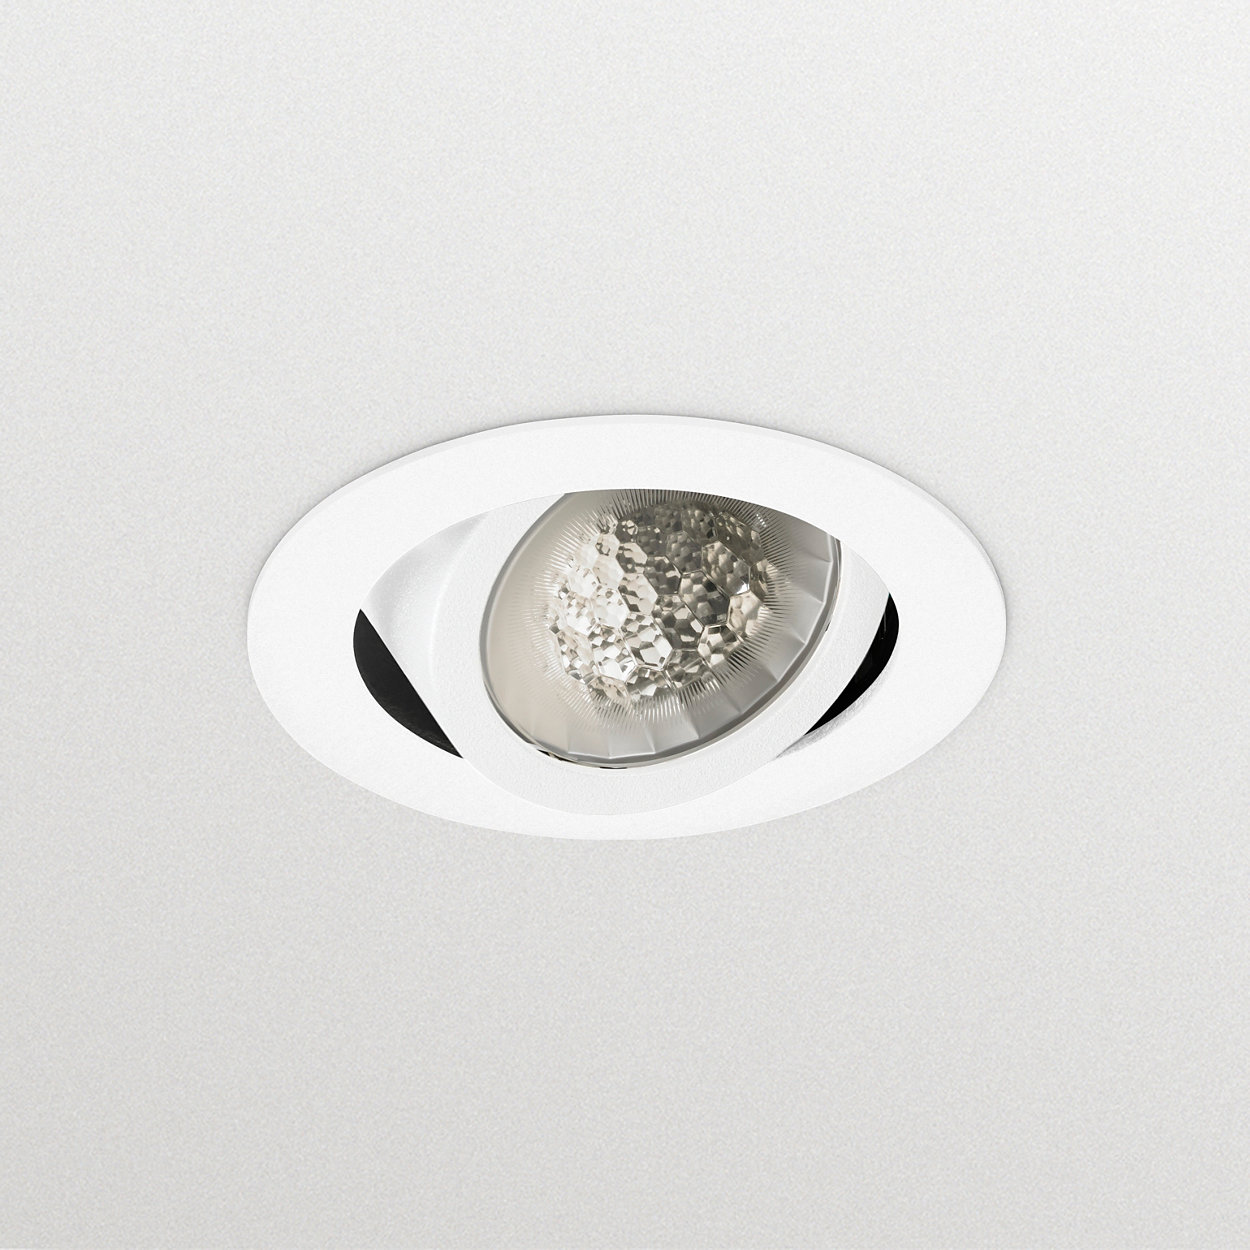 LuxSpace Accent Mini – The smallest recessed spotlights for retail and hospitality